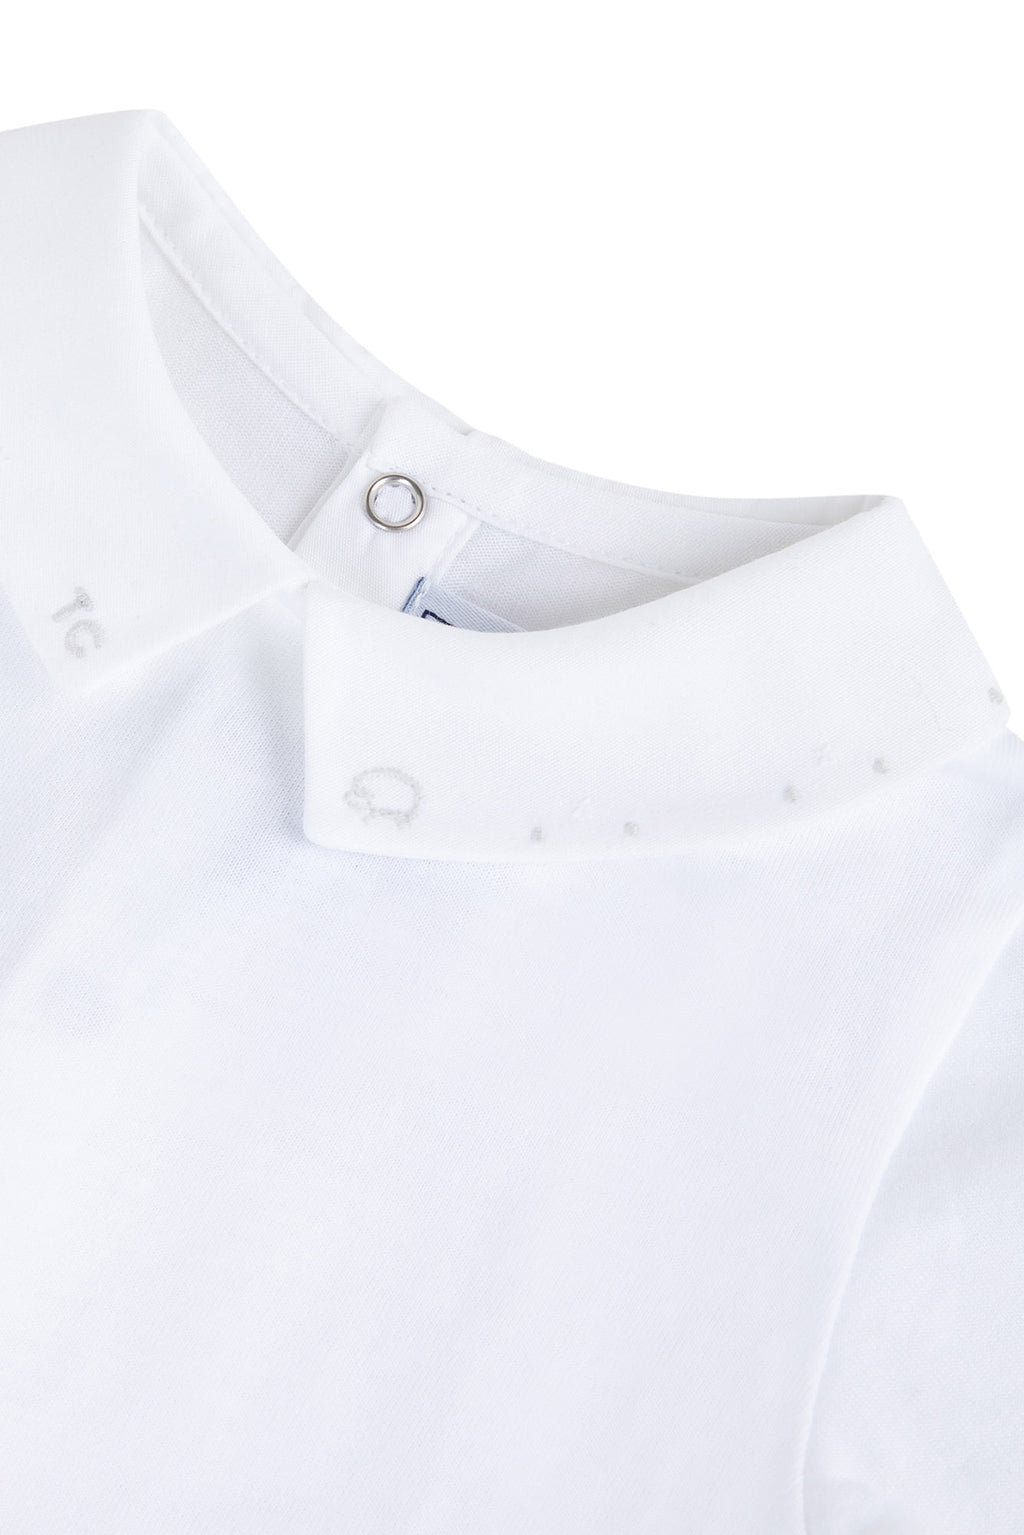 Body - Jersey White Pointed collar